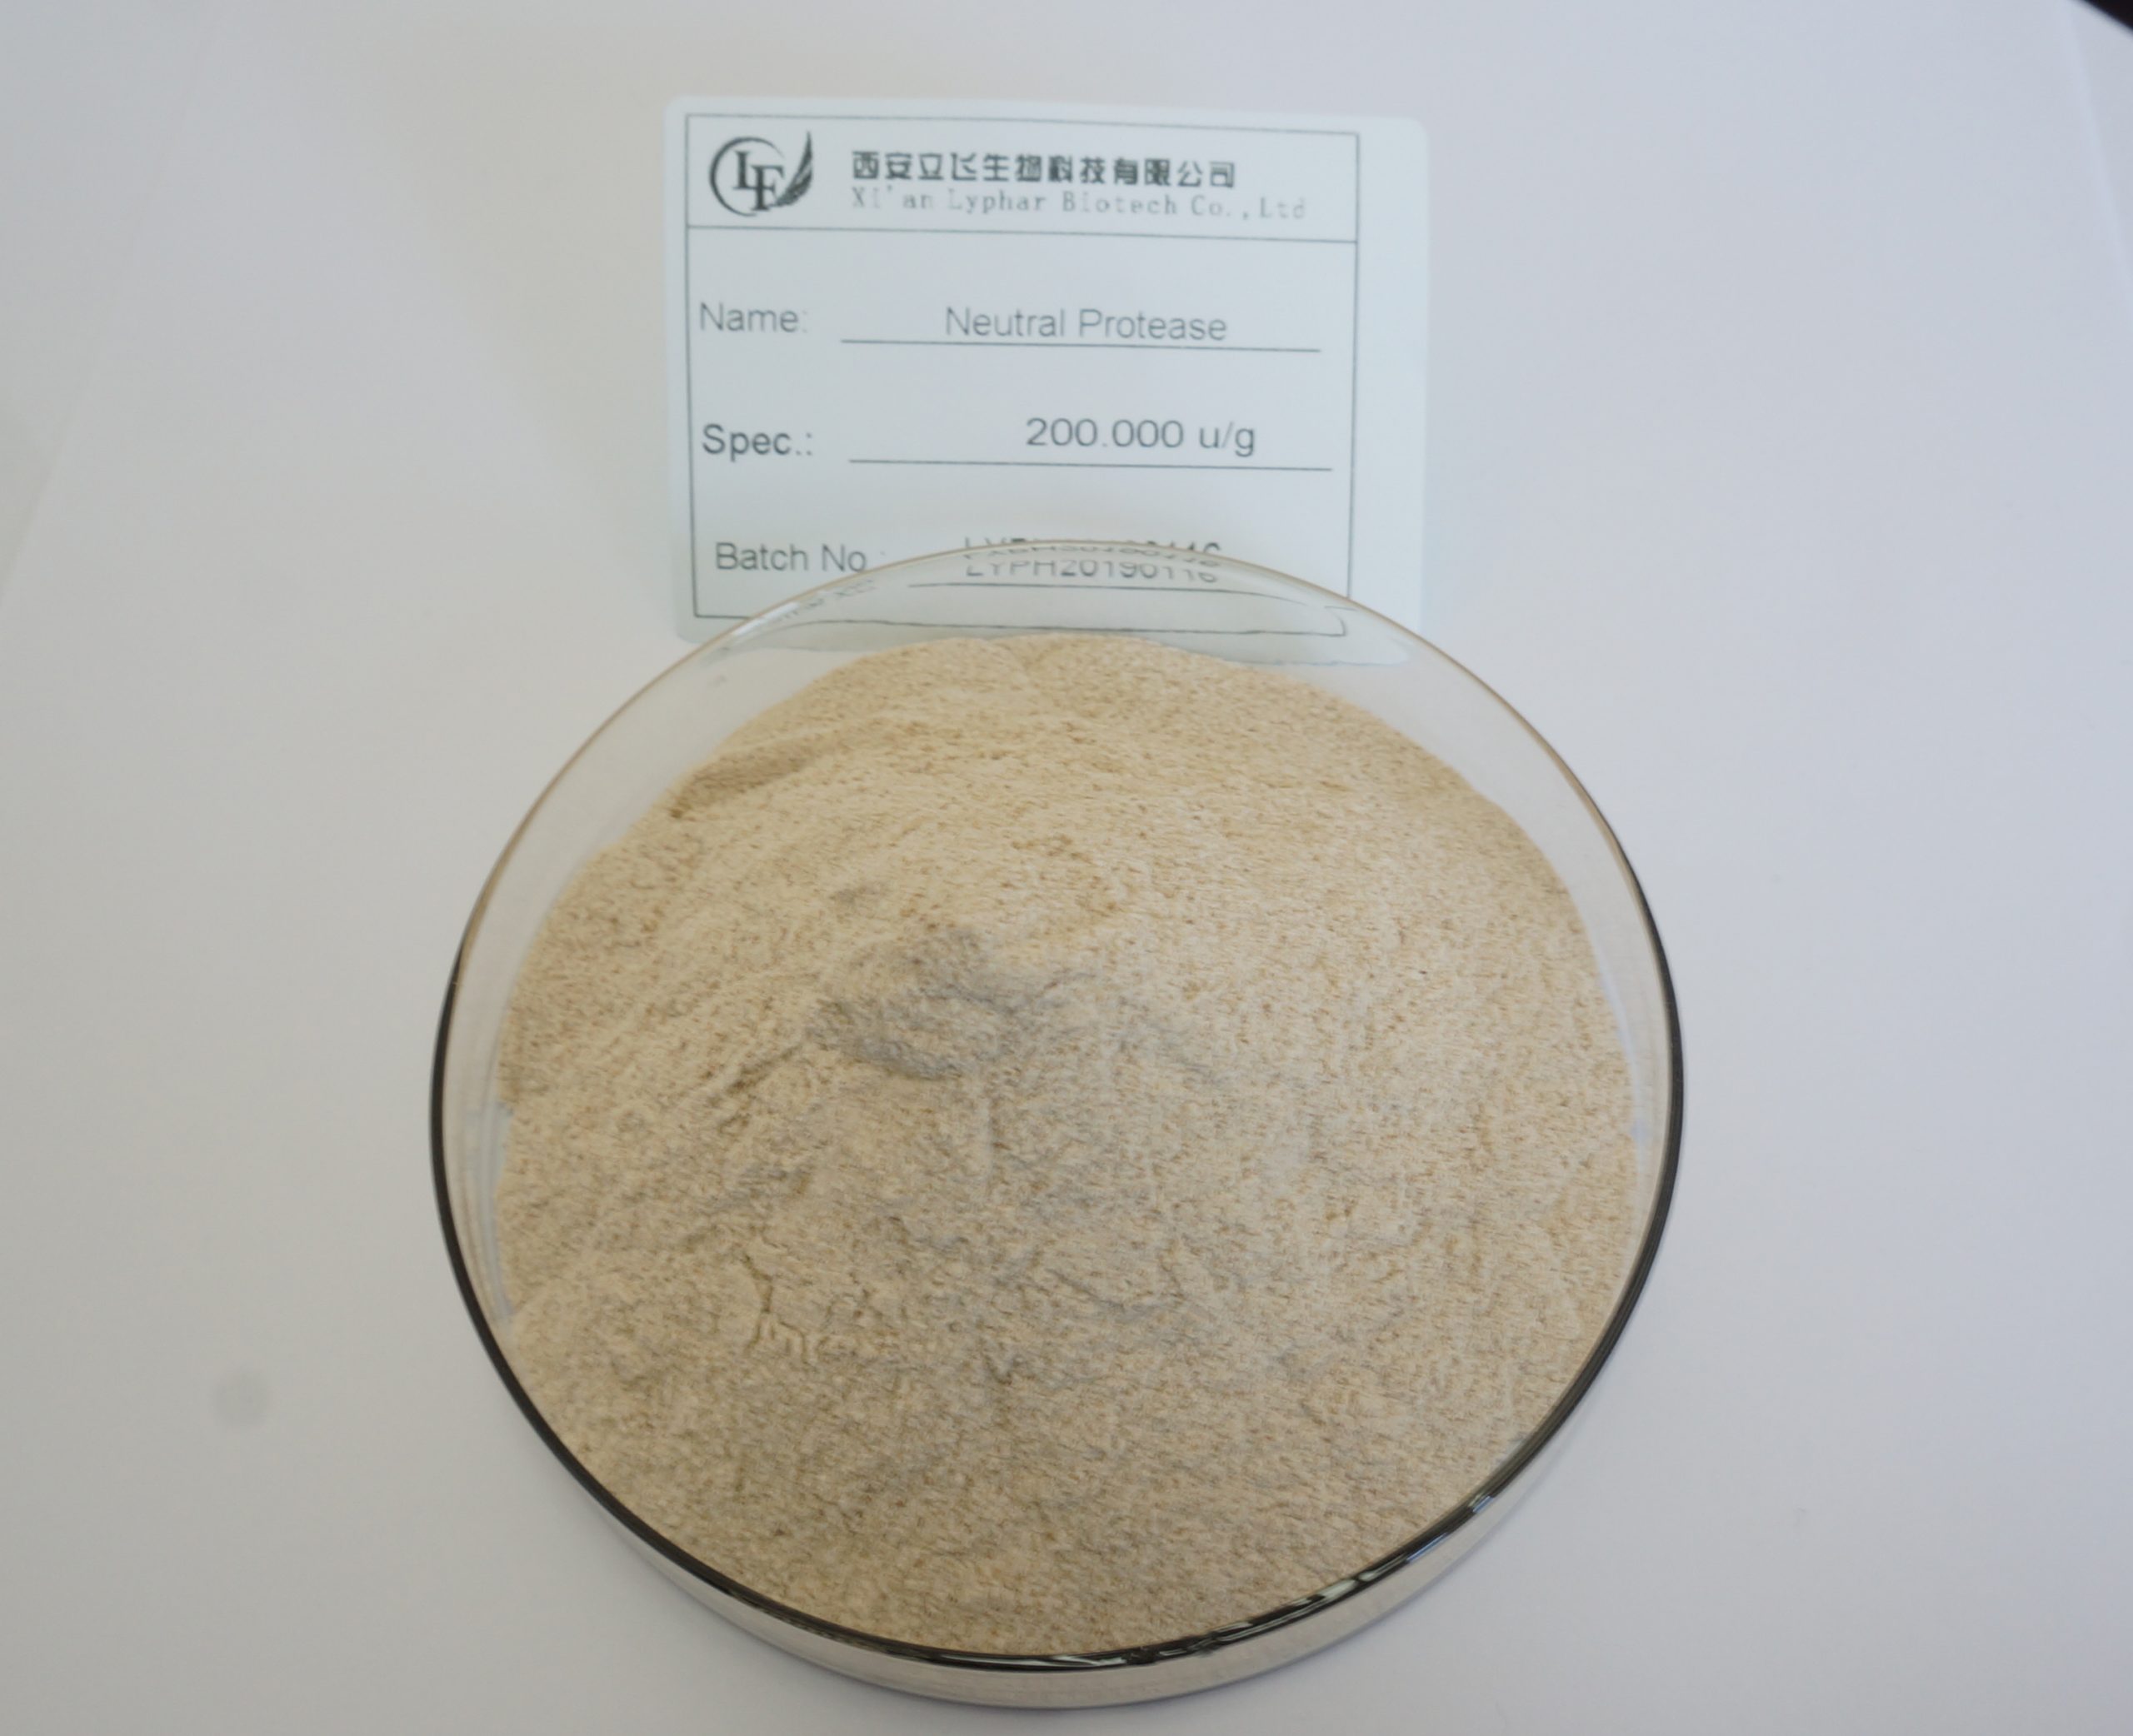 Efficacy and action of Protease-Xi'an Lyphar Biotech Co., Ltd